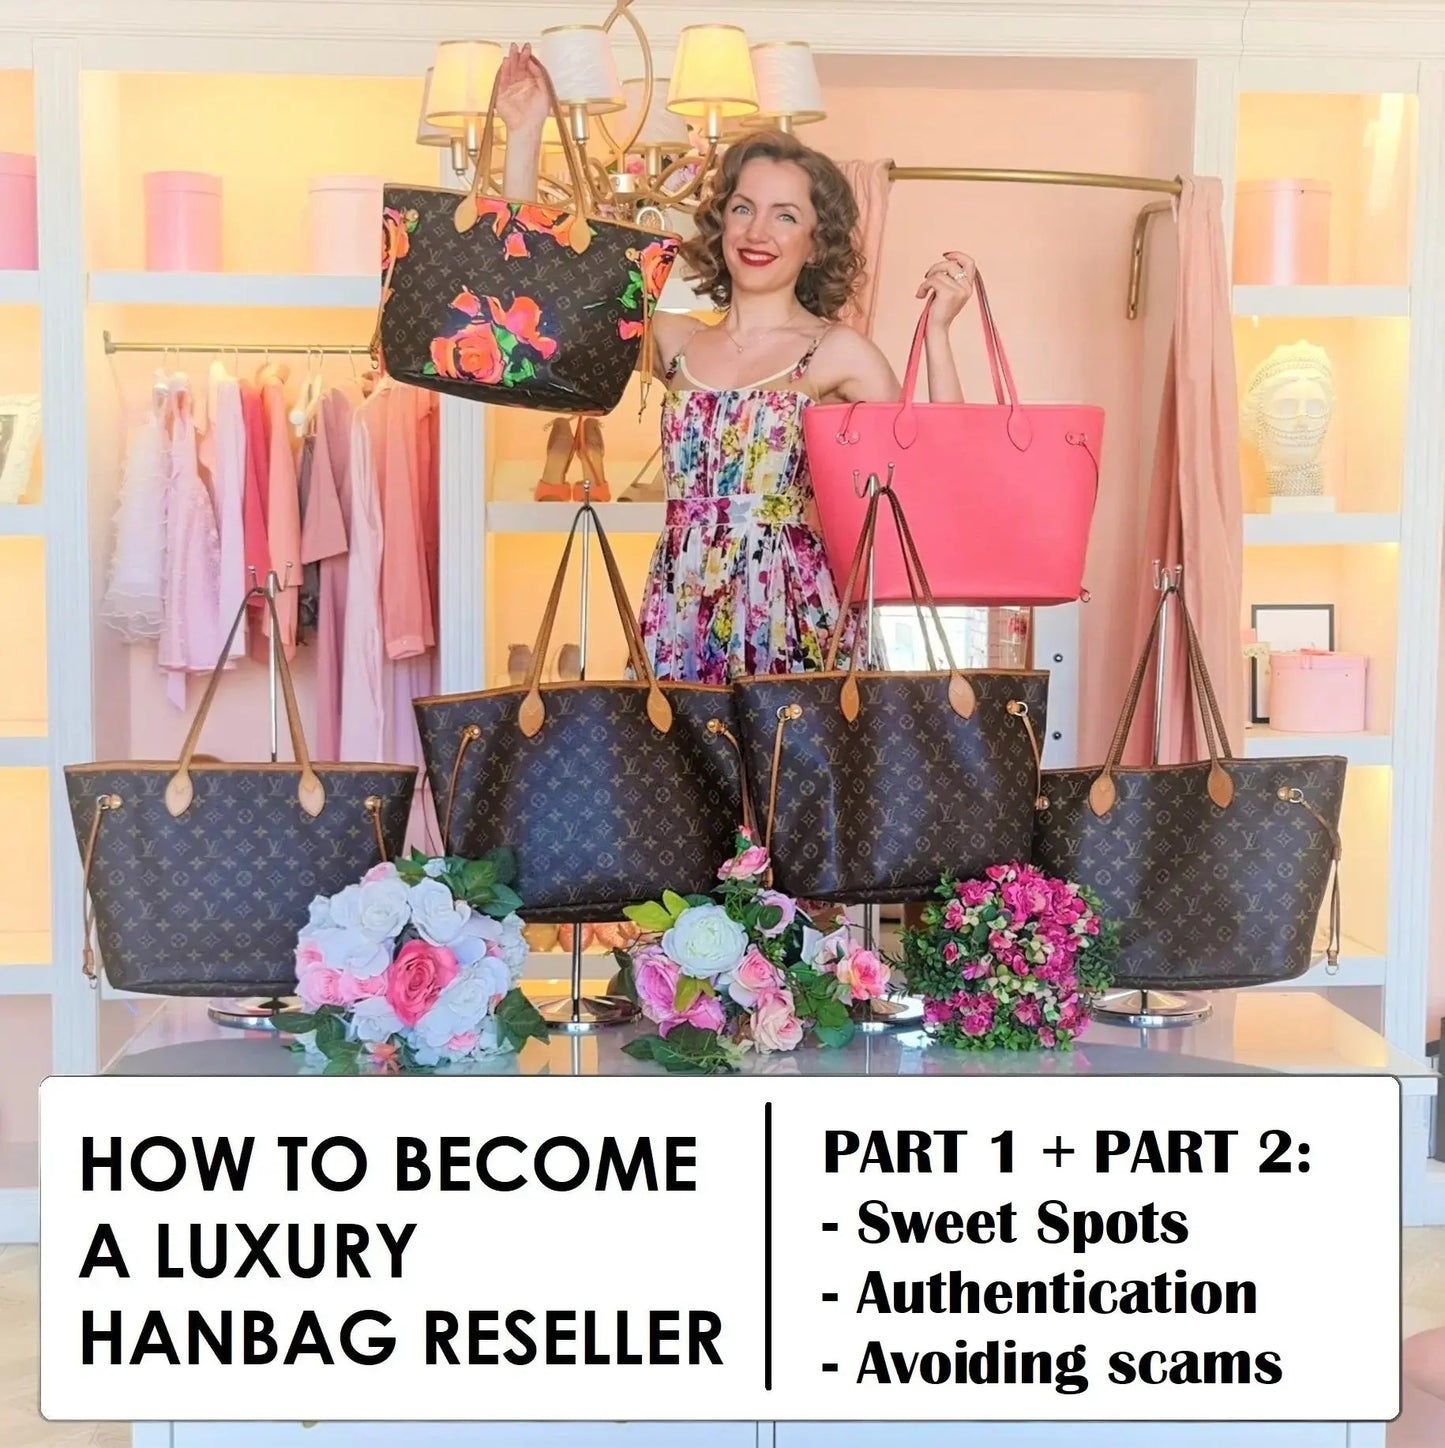 Bagaholic How To Become a Luxury Handbag Reseller Online Course (PART 1 + PART 2) LVBagaholic